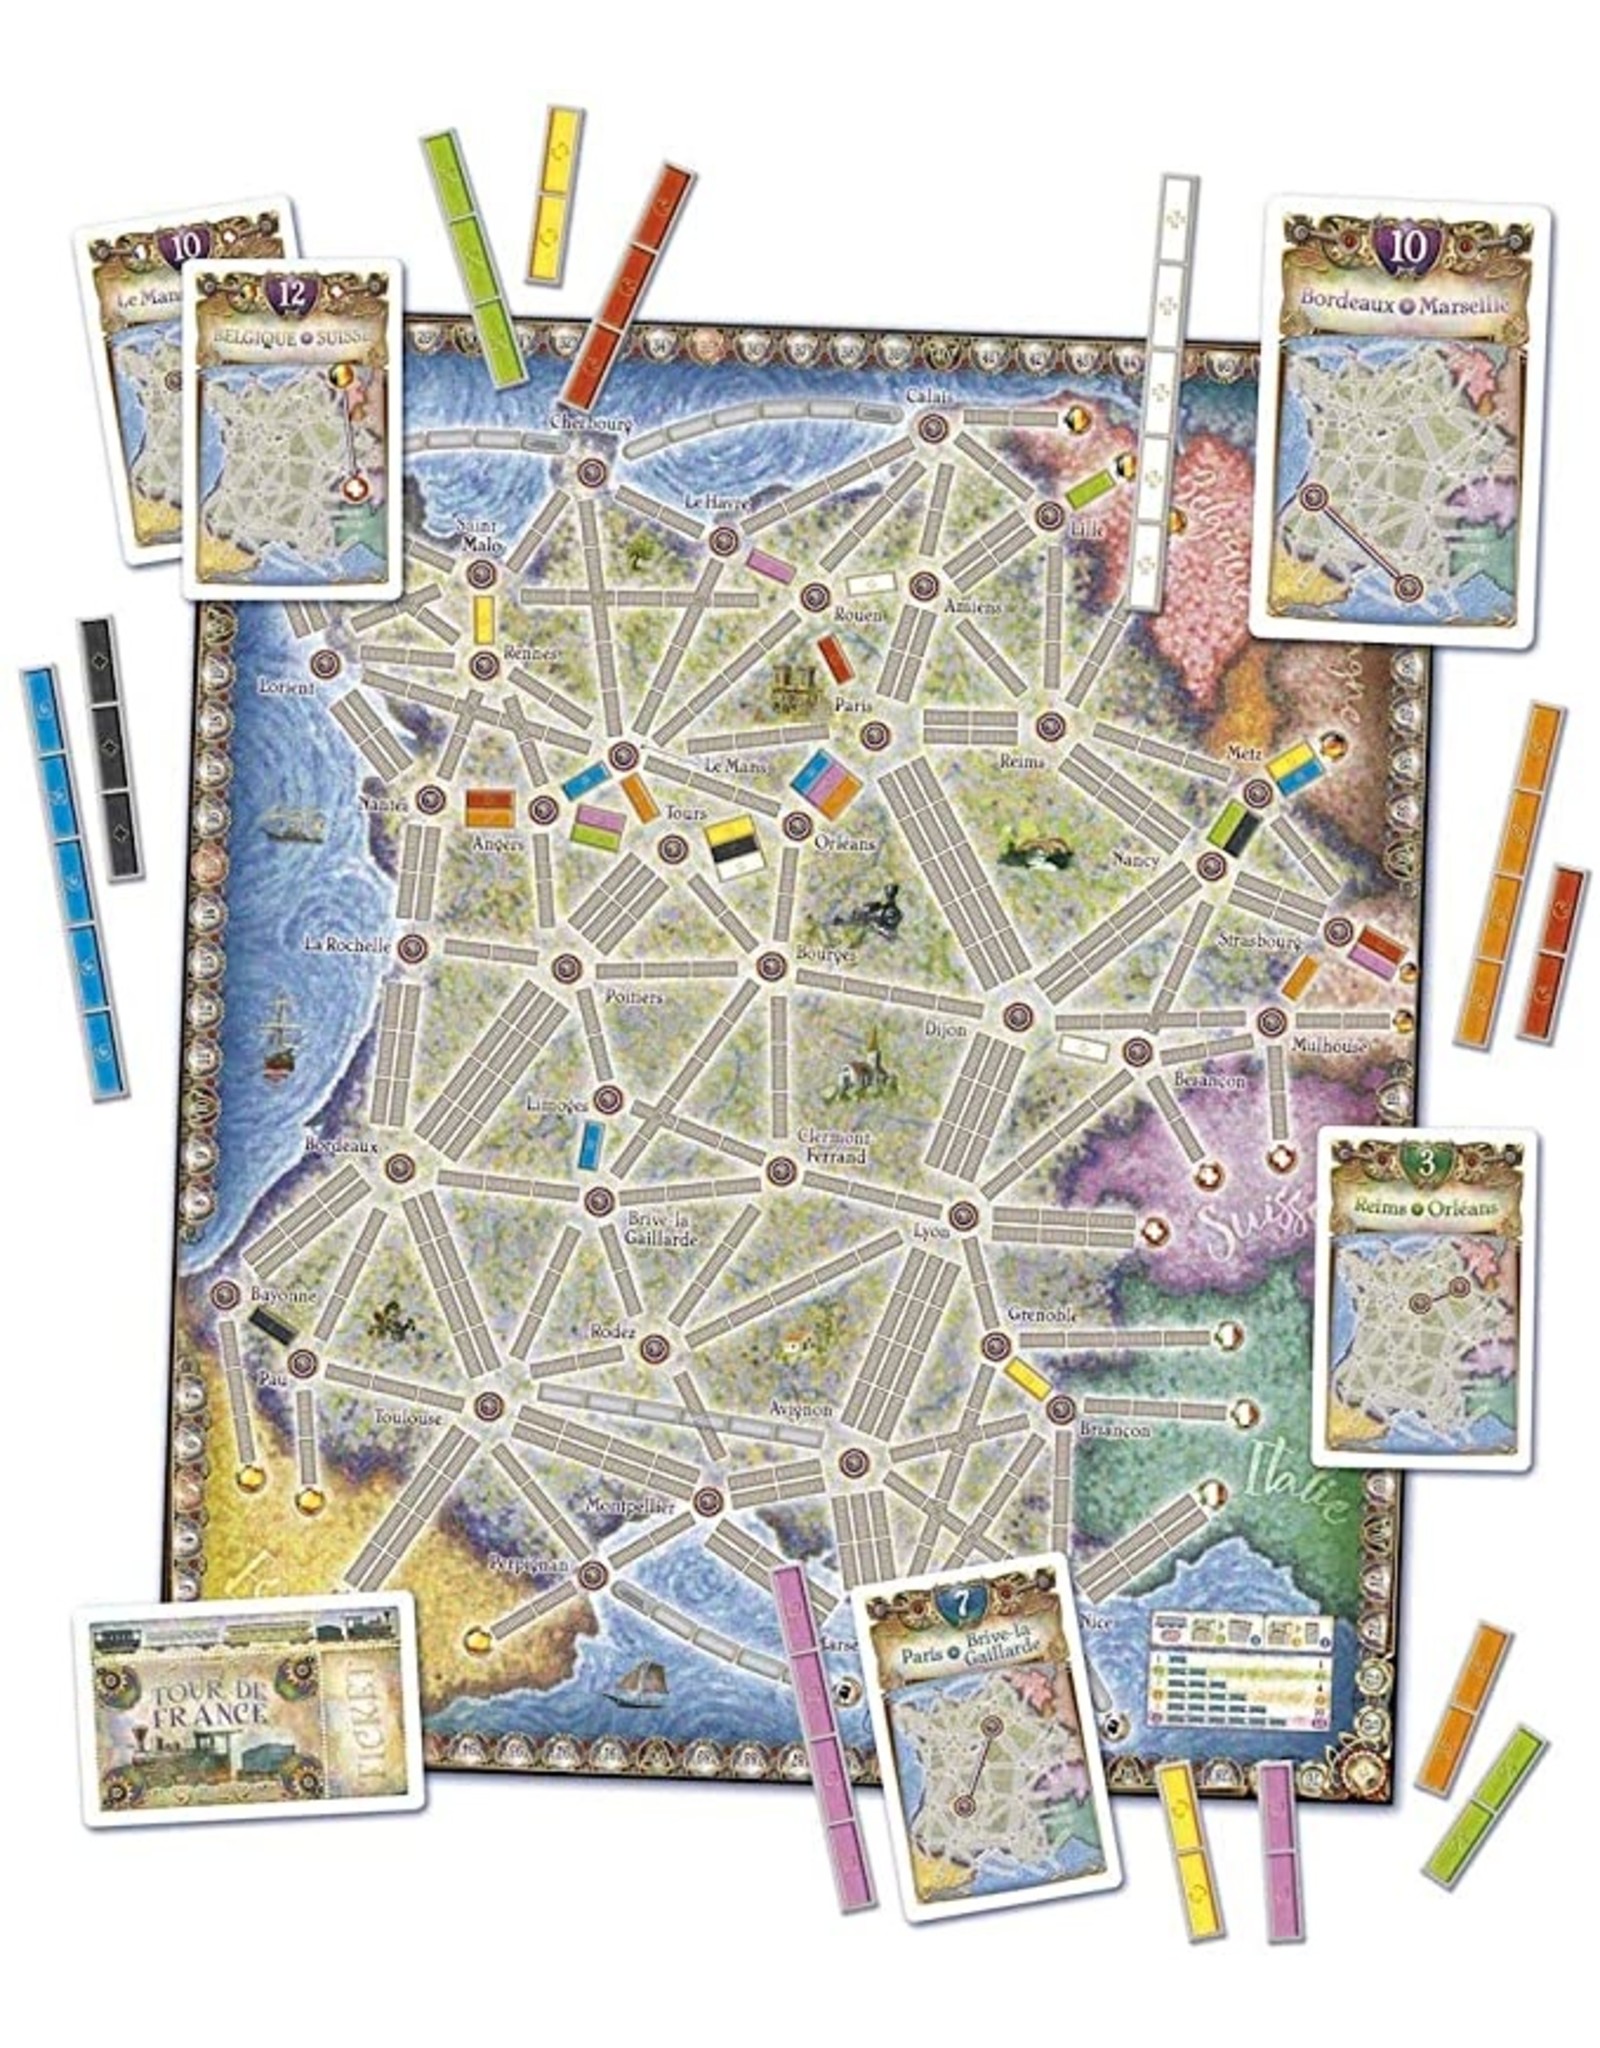 Days of Wonder Ticket to Ride: Map #6 - France/Old West